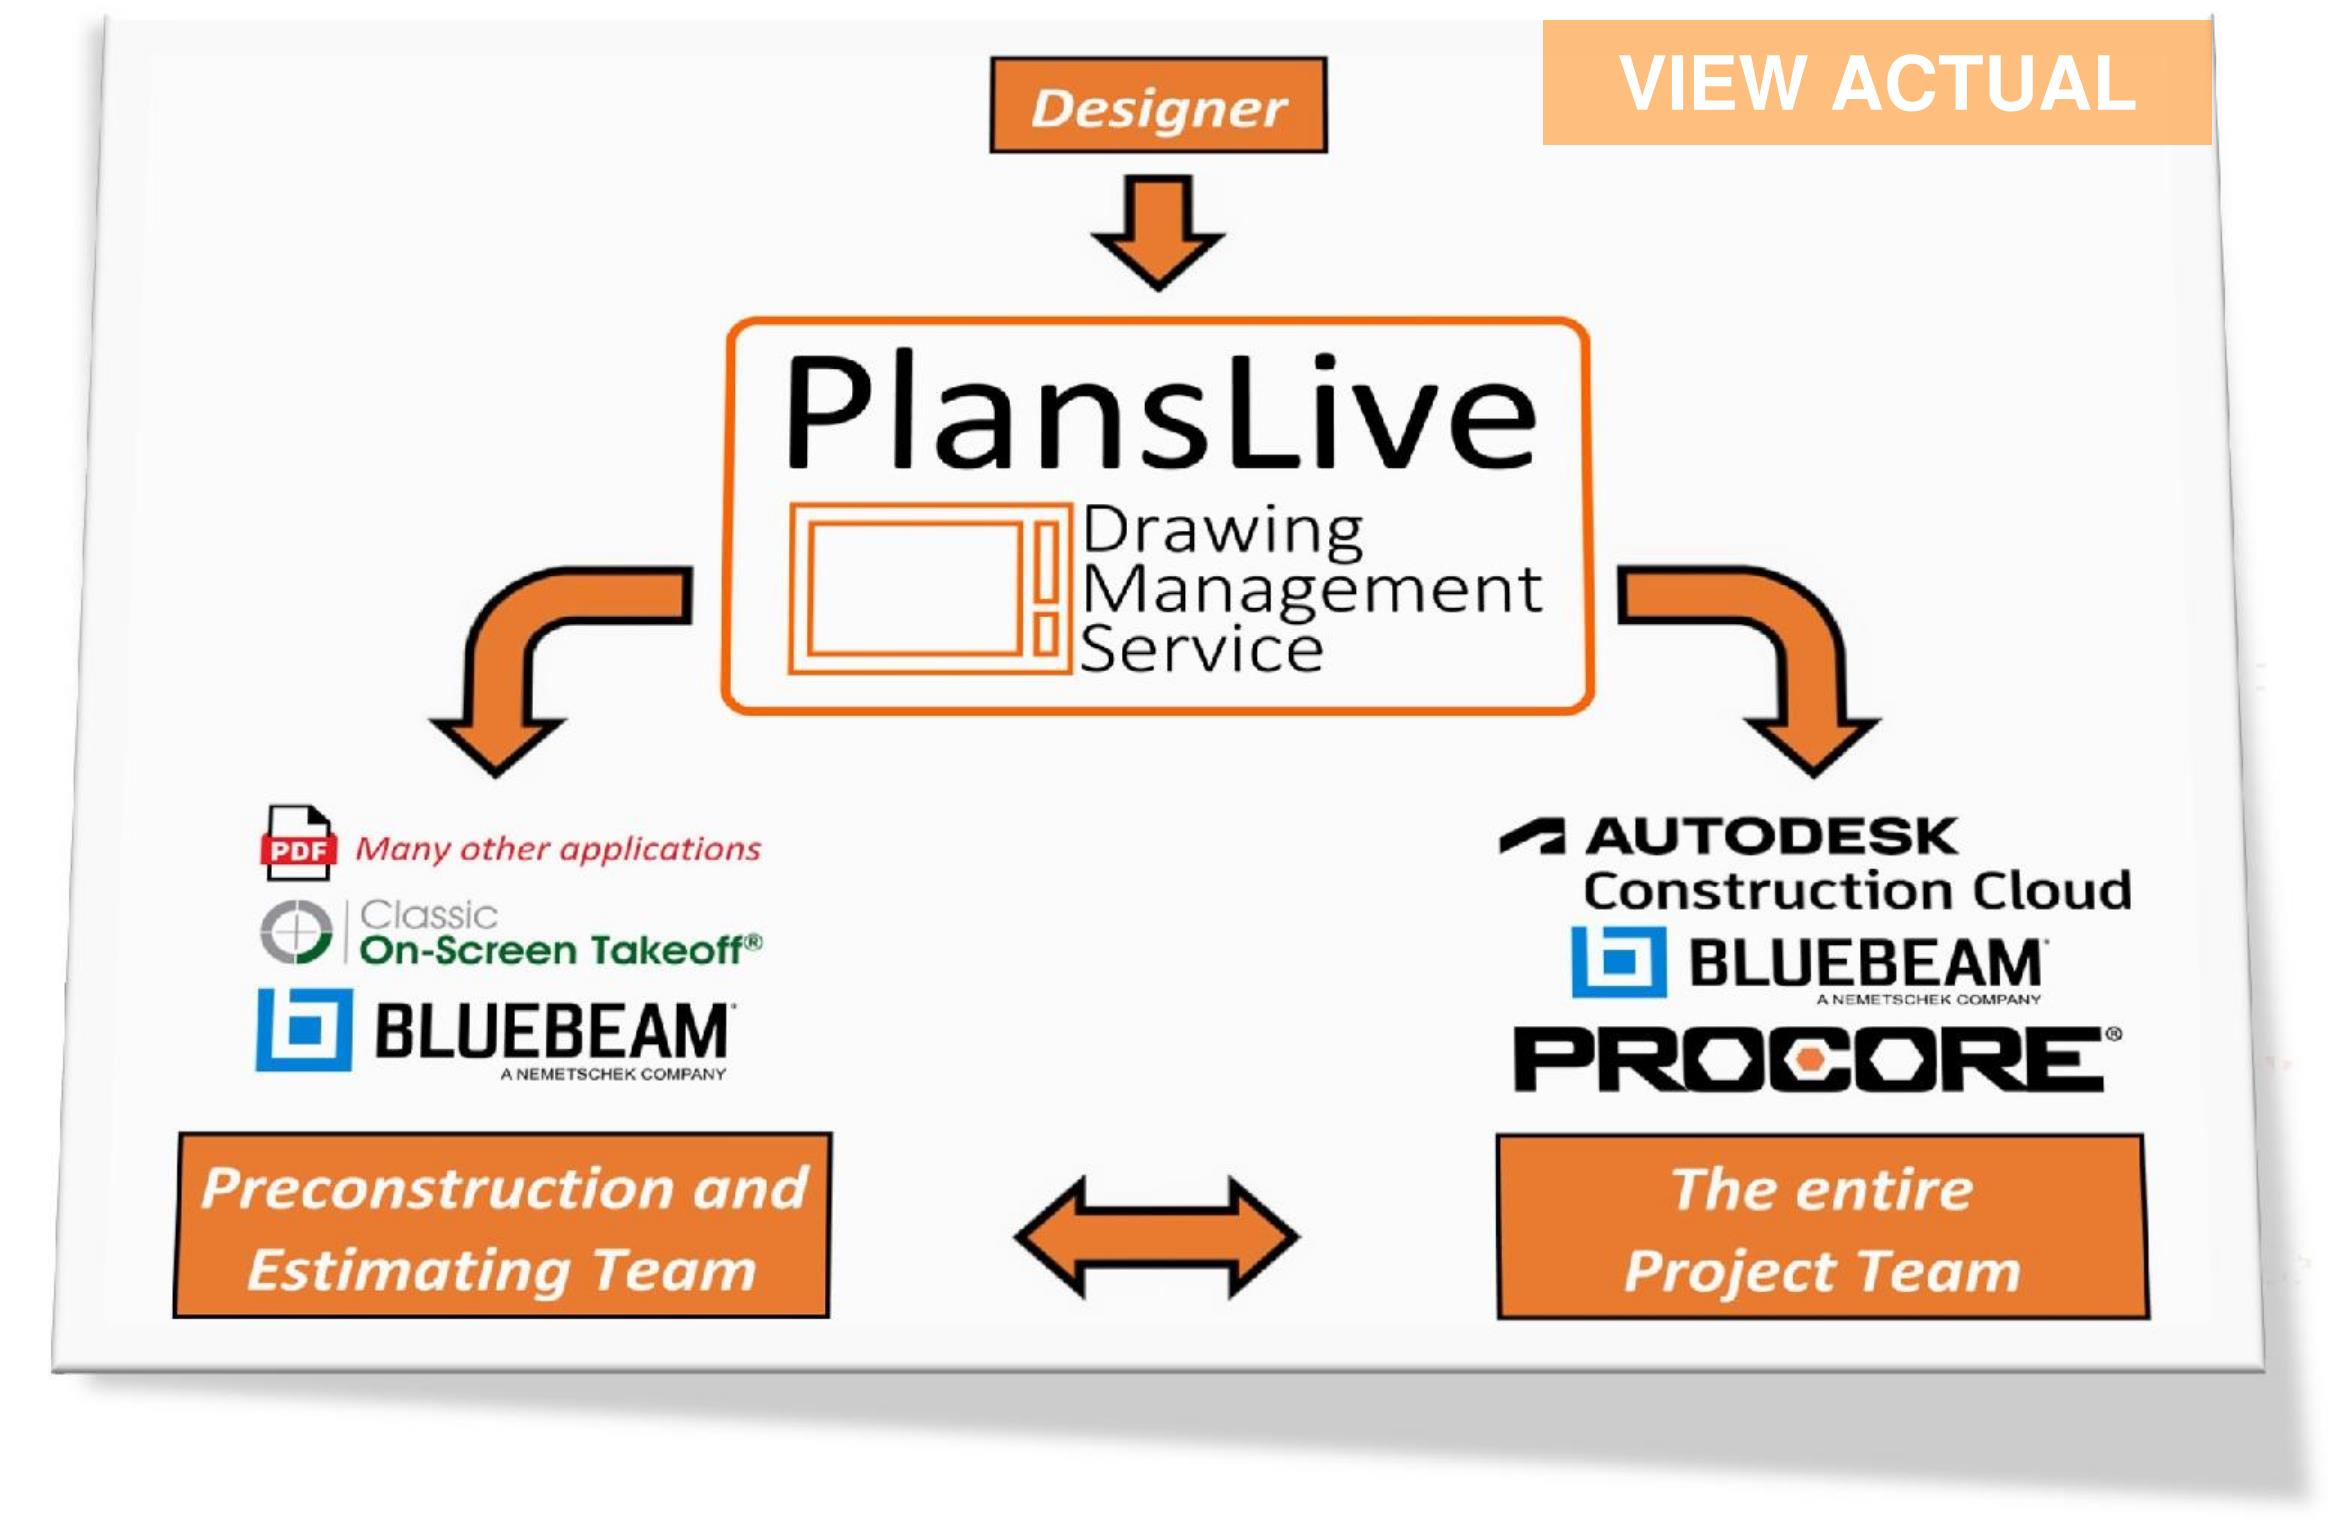 Planslive works with Procore, Plangrid, Bluebeam and all other software